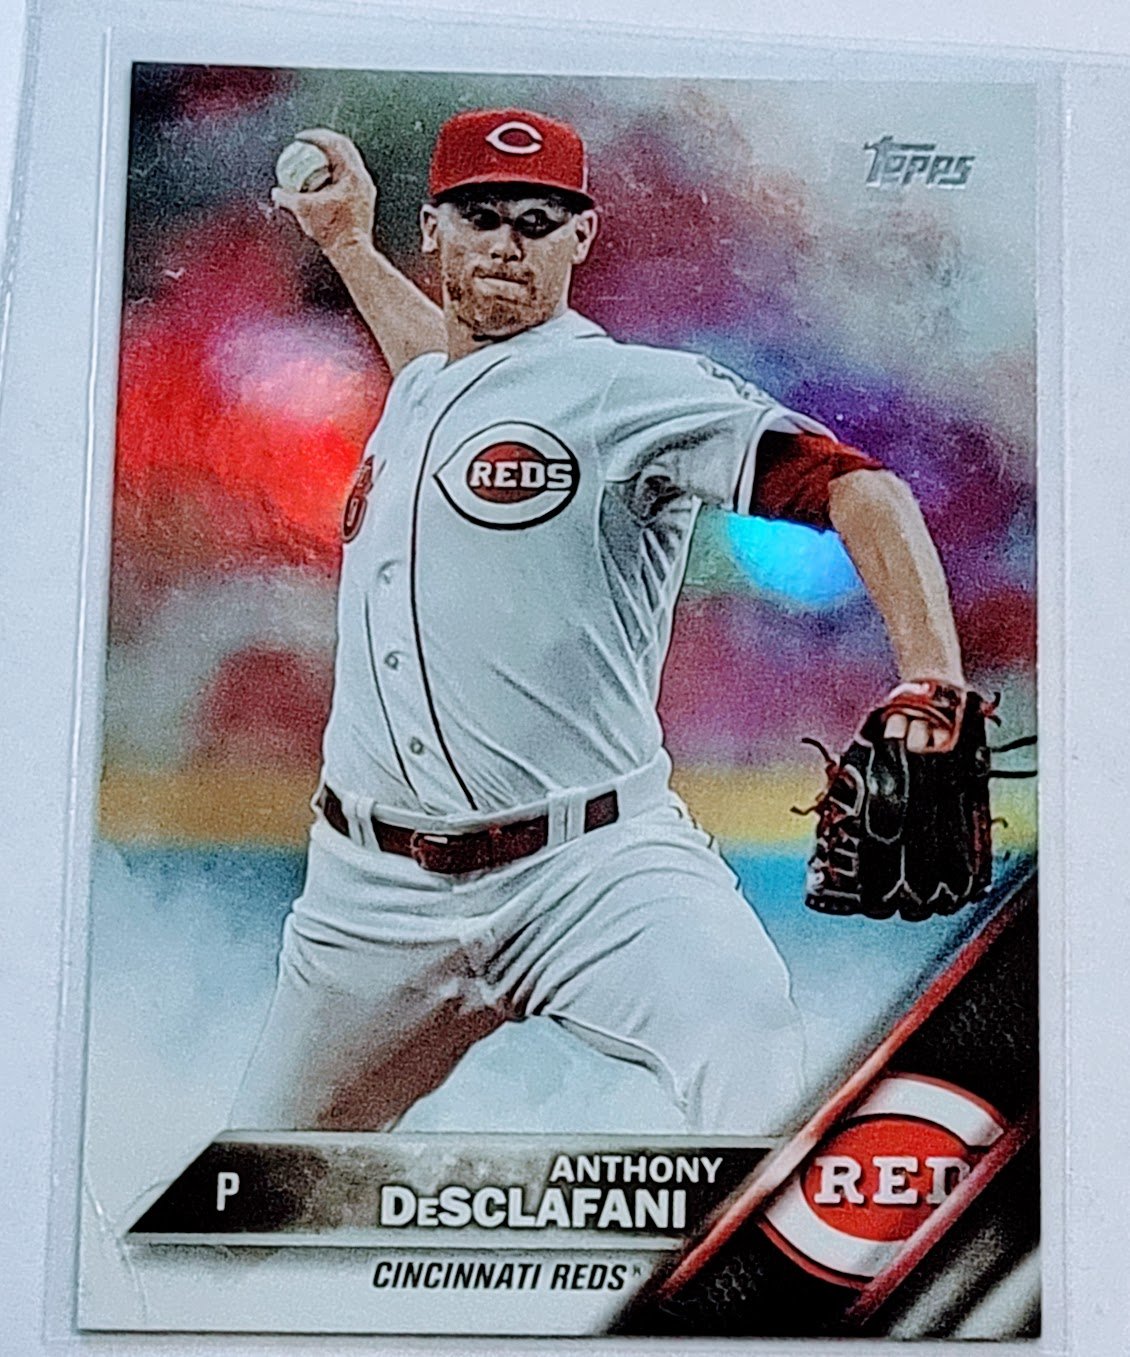 2016 Topps Anthony DeSclafani Rainbow Foil Refractor Baseball Card TPTV simple Xclusive Collectibles   